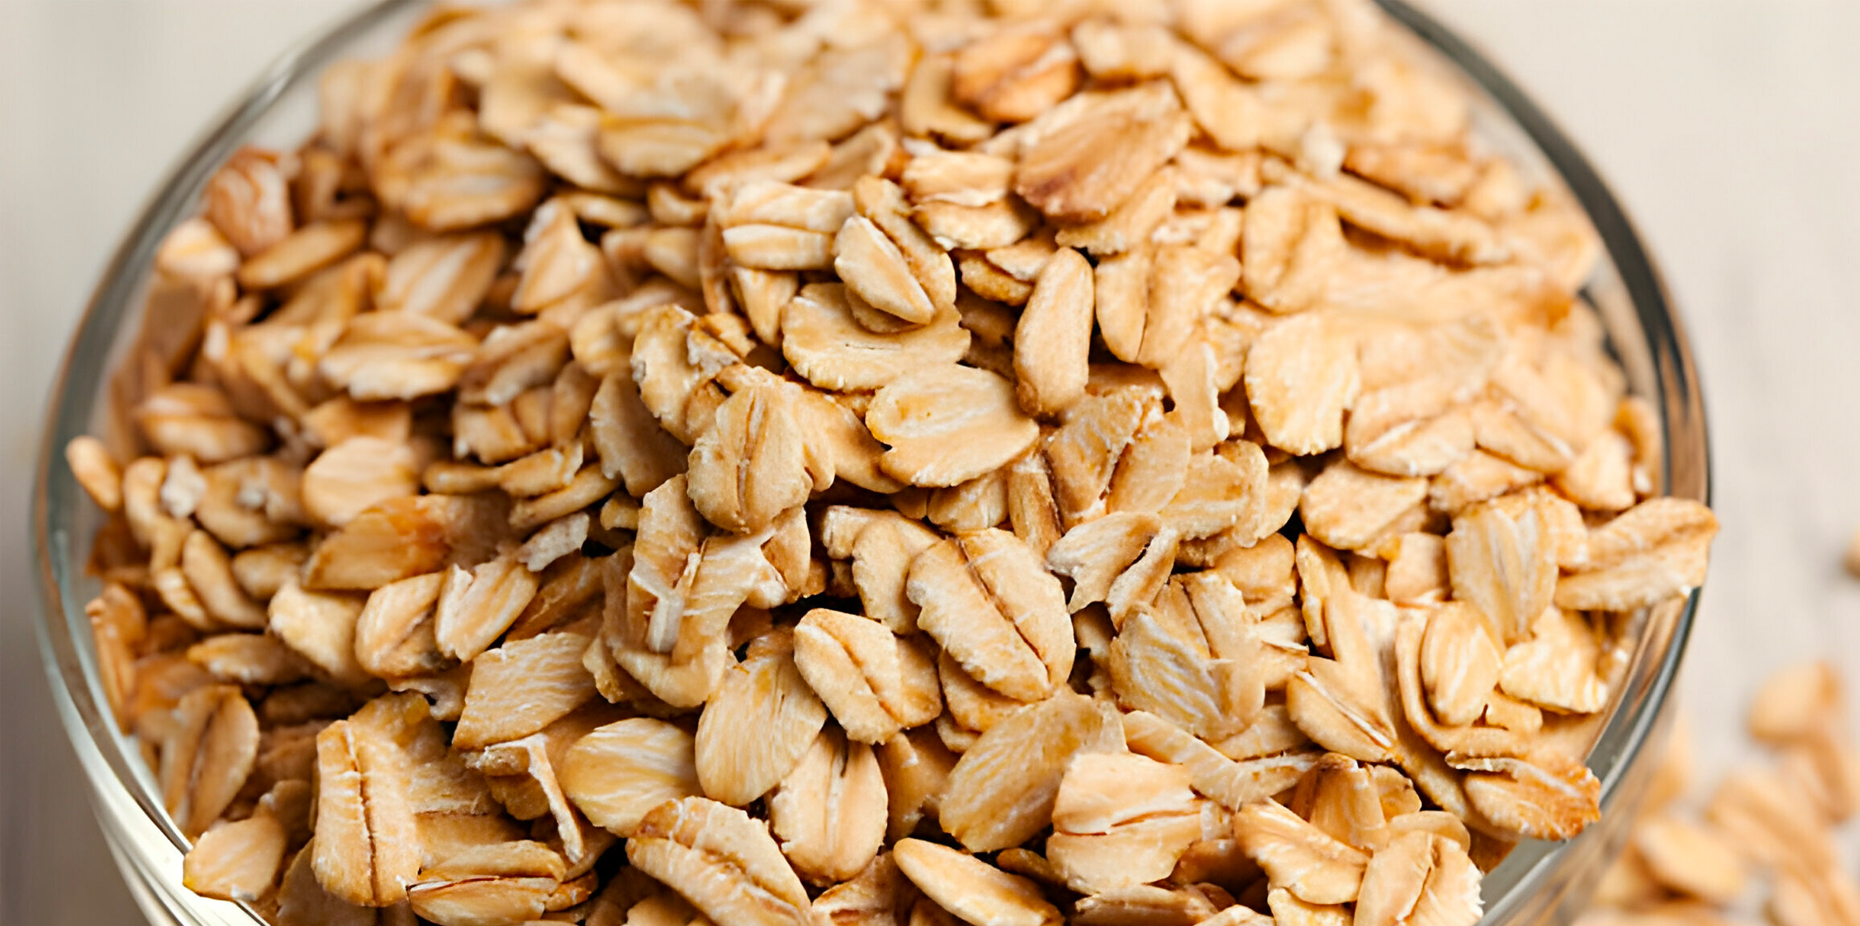 Oats: Facts, Nutrition, Benefits, & More